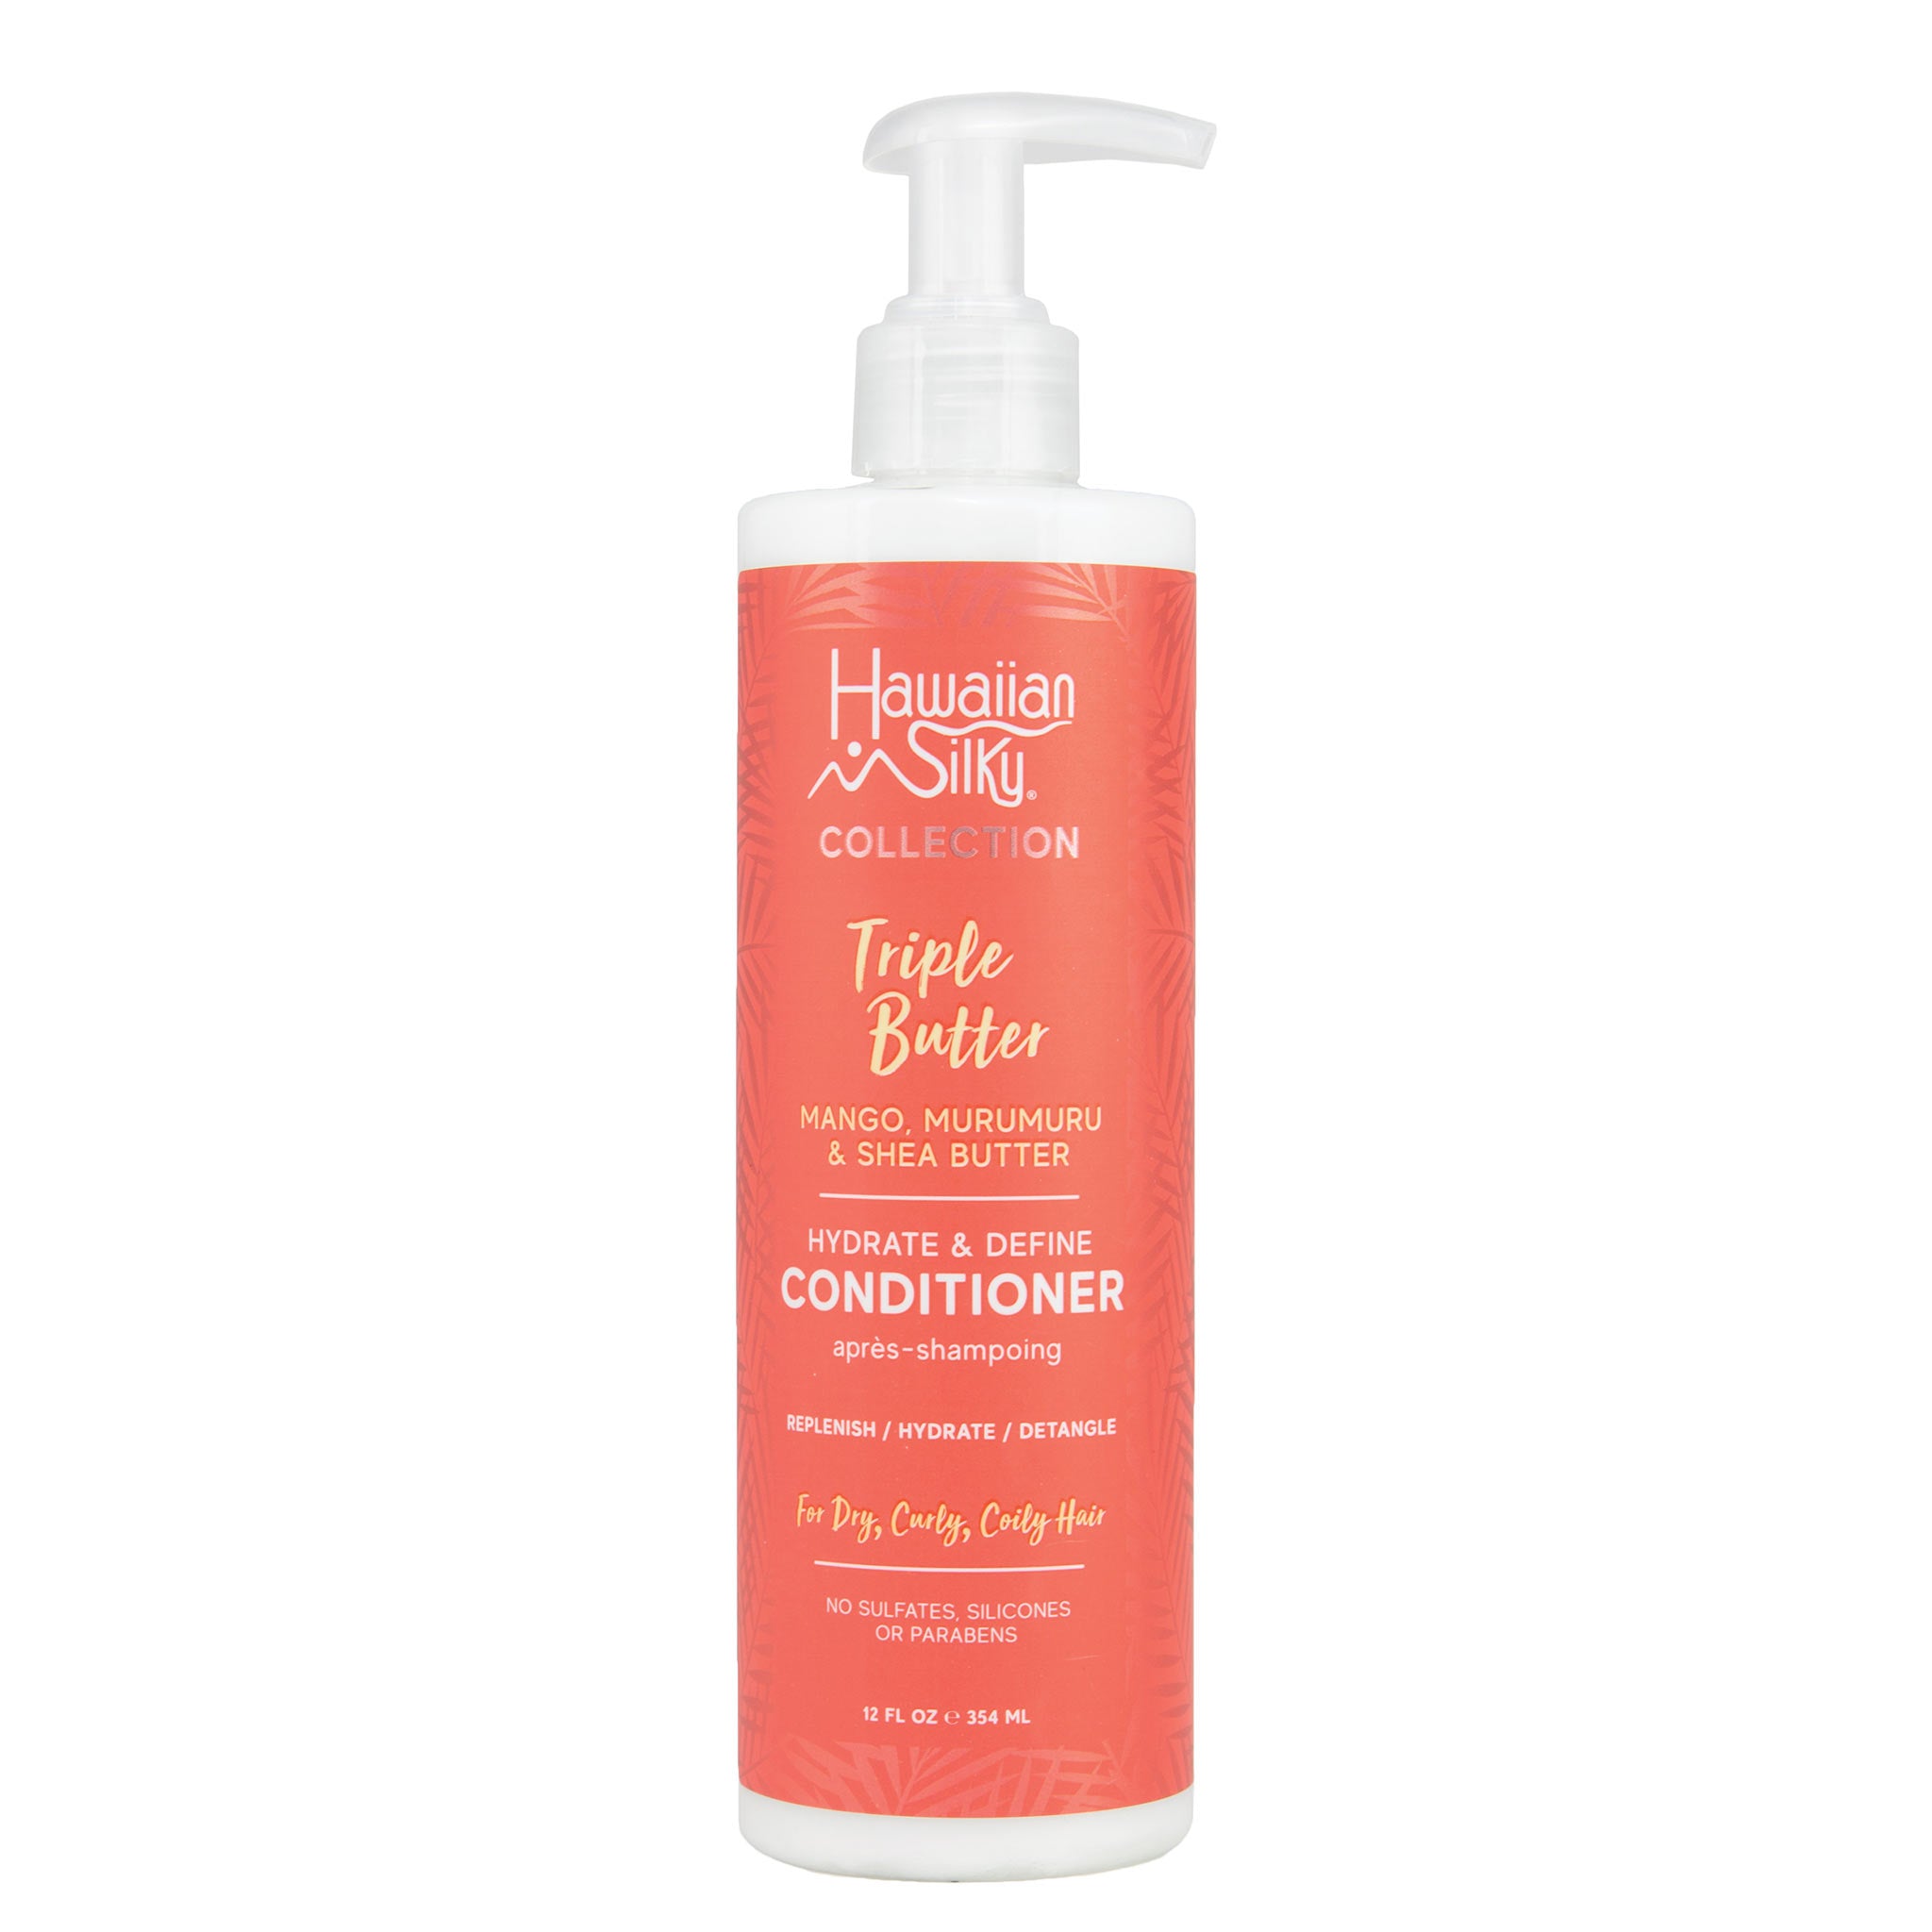 Hawaiian Silky Triple Butter Hydrate & Define Conditioner - Afam Concept Inc.